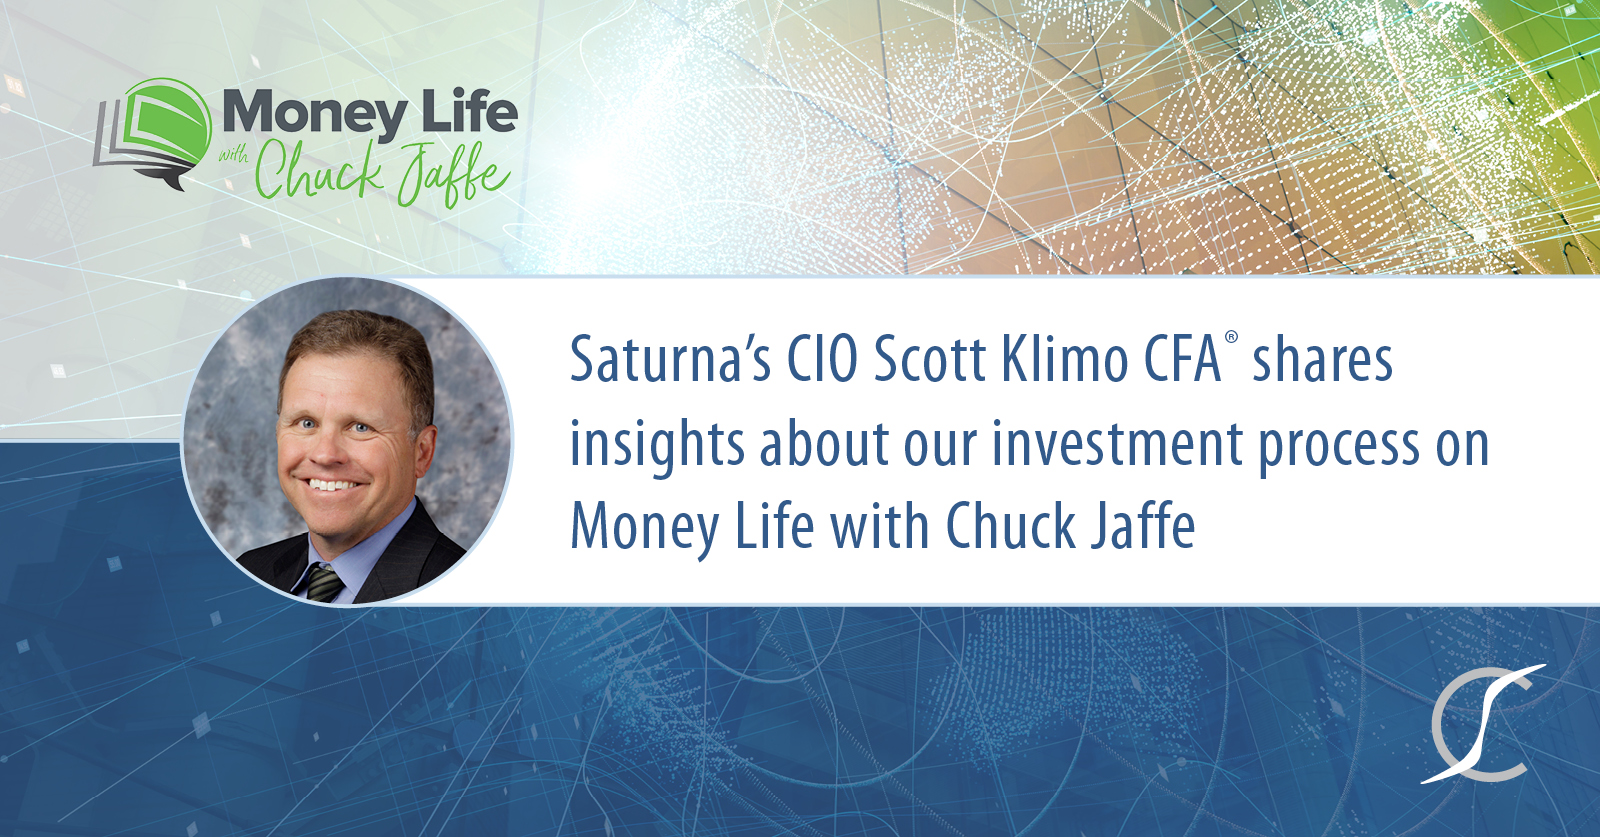 CIO Scott Klimo discusses Saturna's investment philosophy on The Money Life with Chuck Jaffe podcast